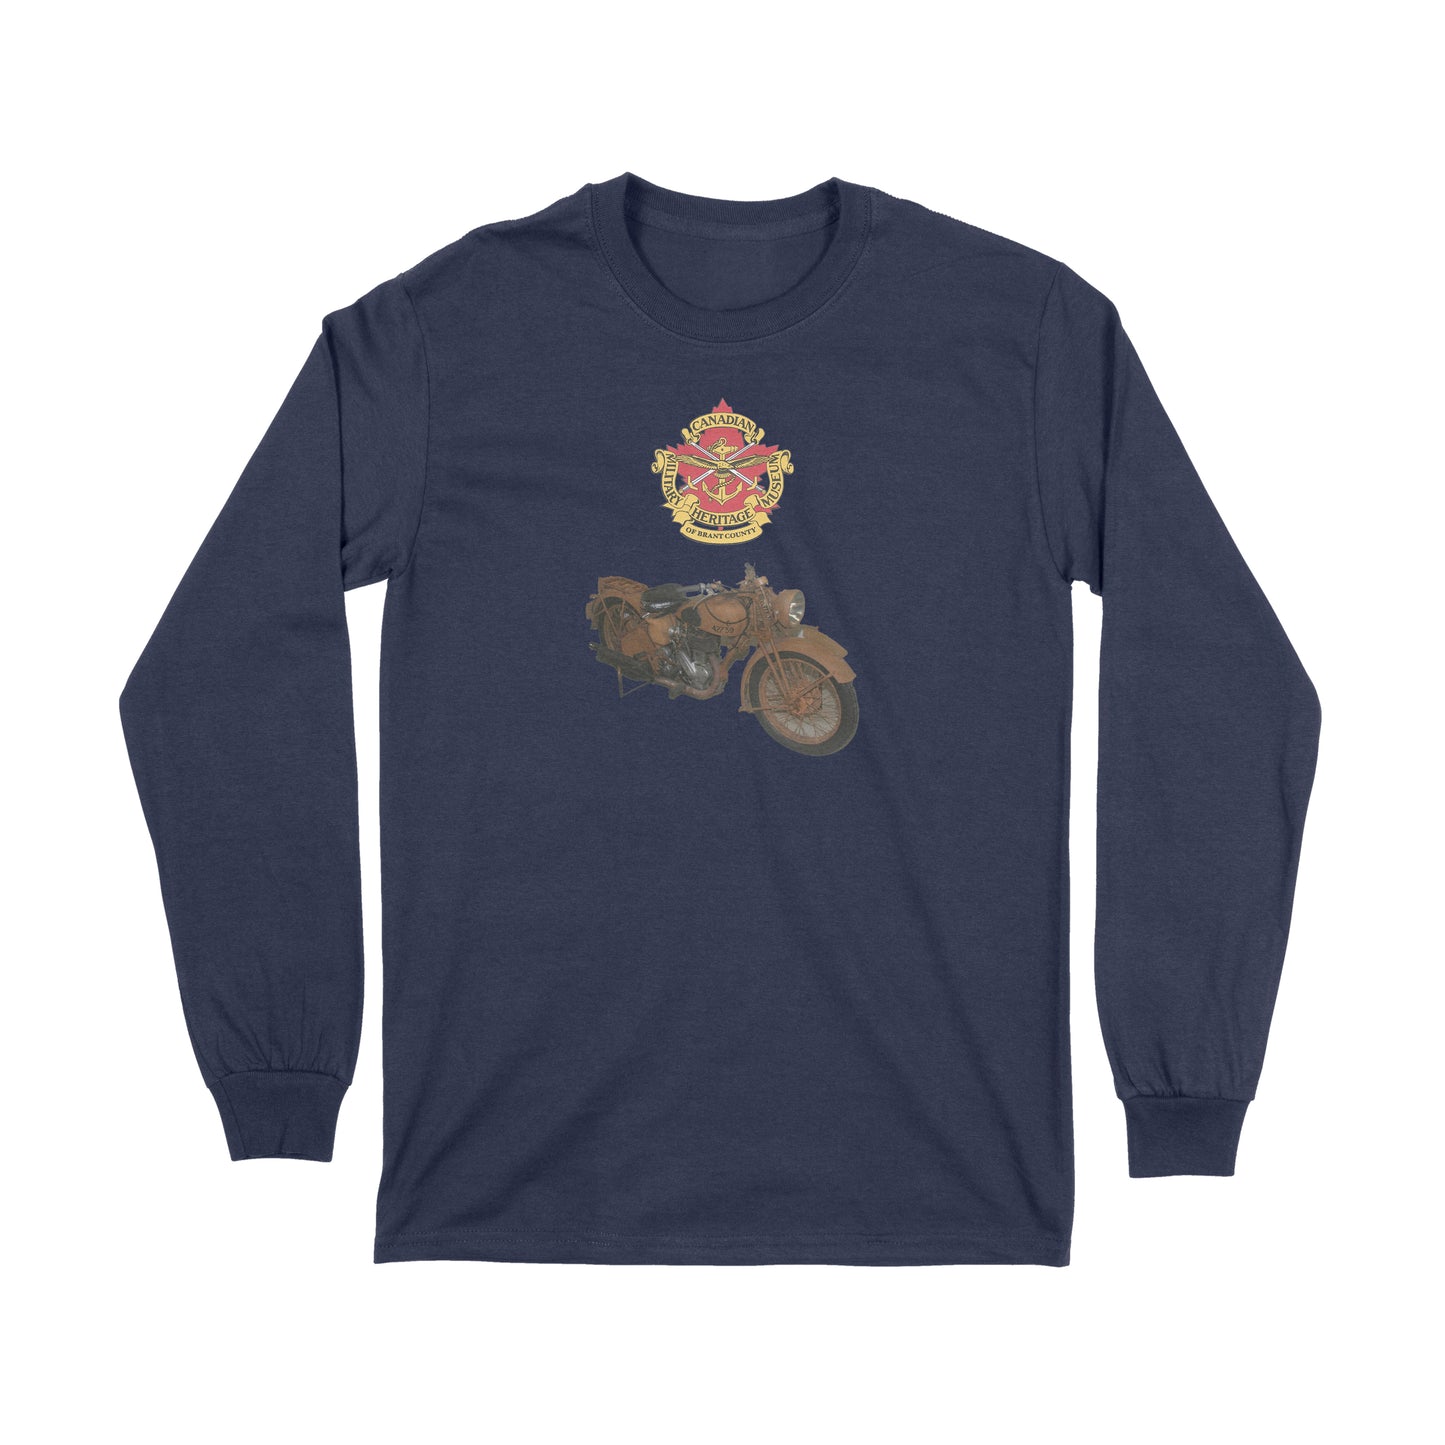 Brantford, Canadian Military Heritage Museum, Fat Dave, Long Sleeve, Museum, Norton, Navy Blue